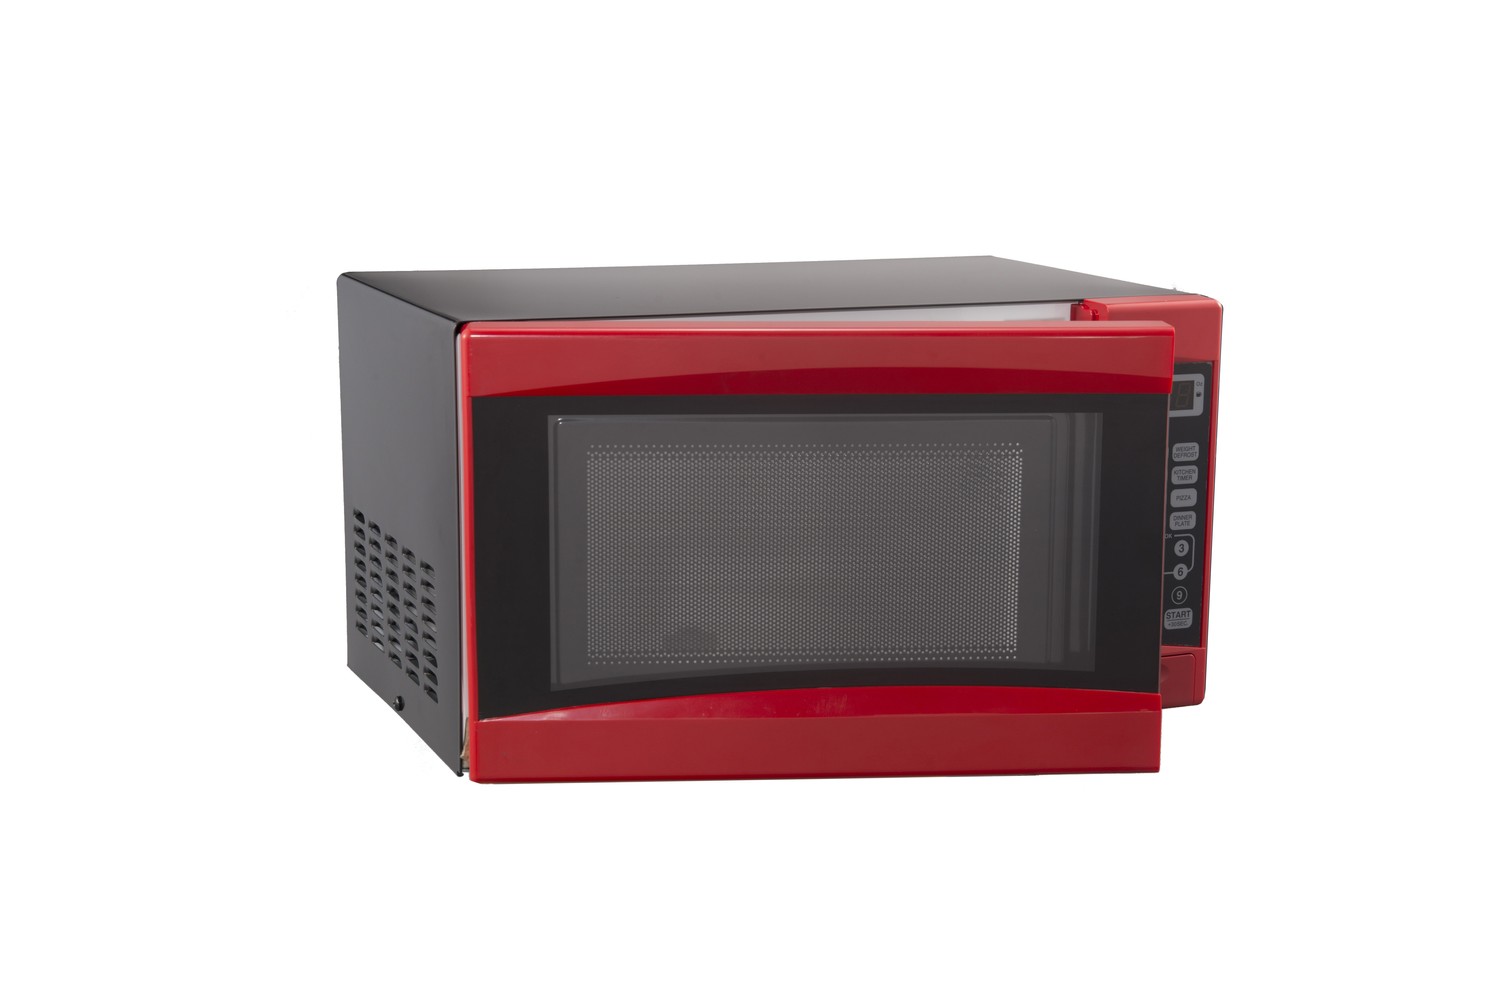 Mainstays EM720CGA-W 0.7 Cu ft Countertop Microwave Oven 190873008811